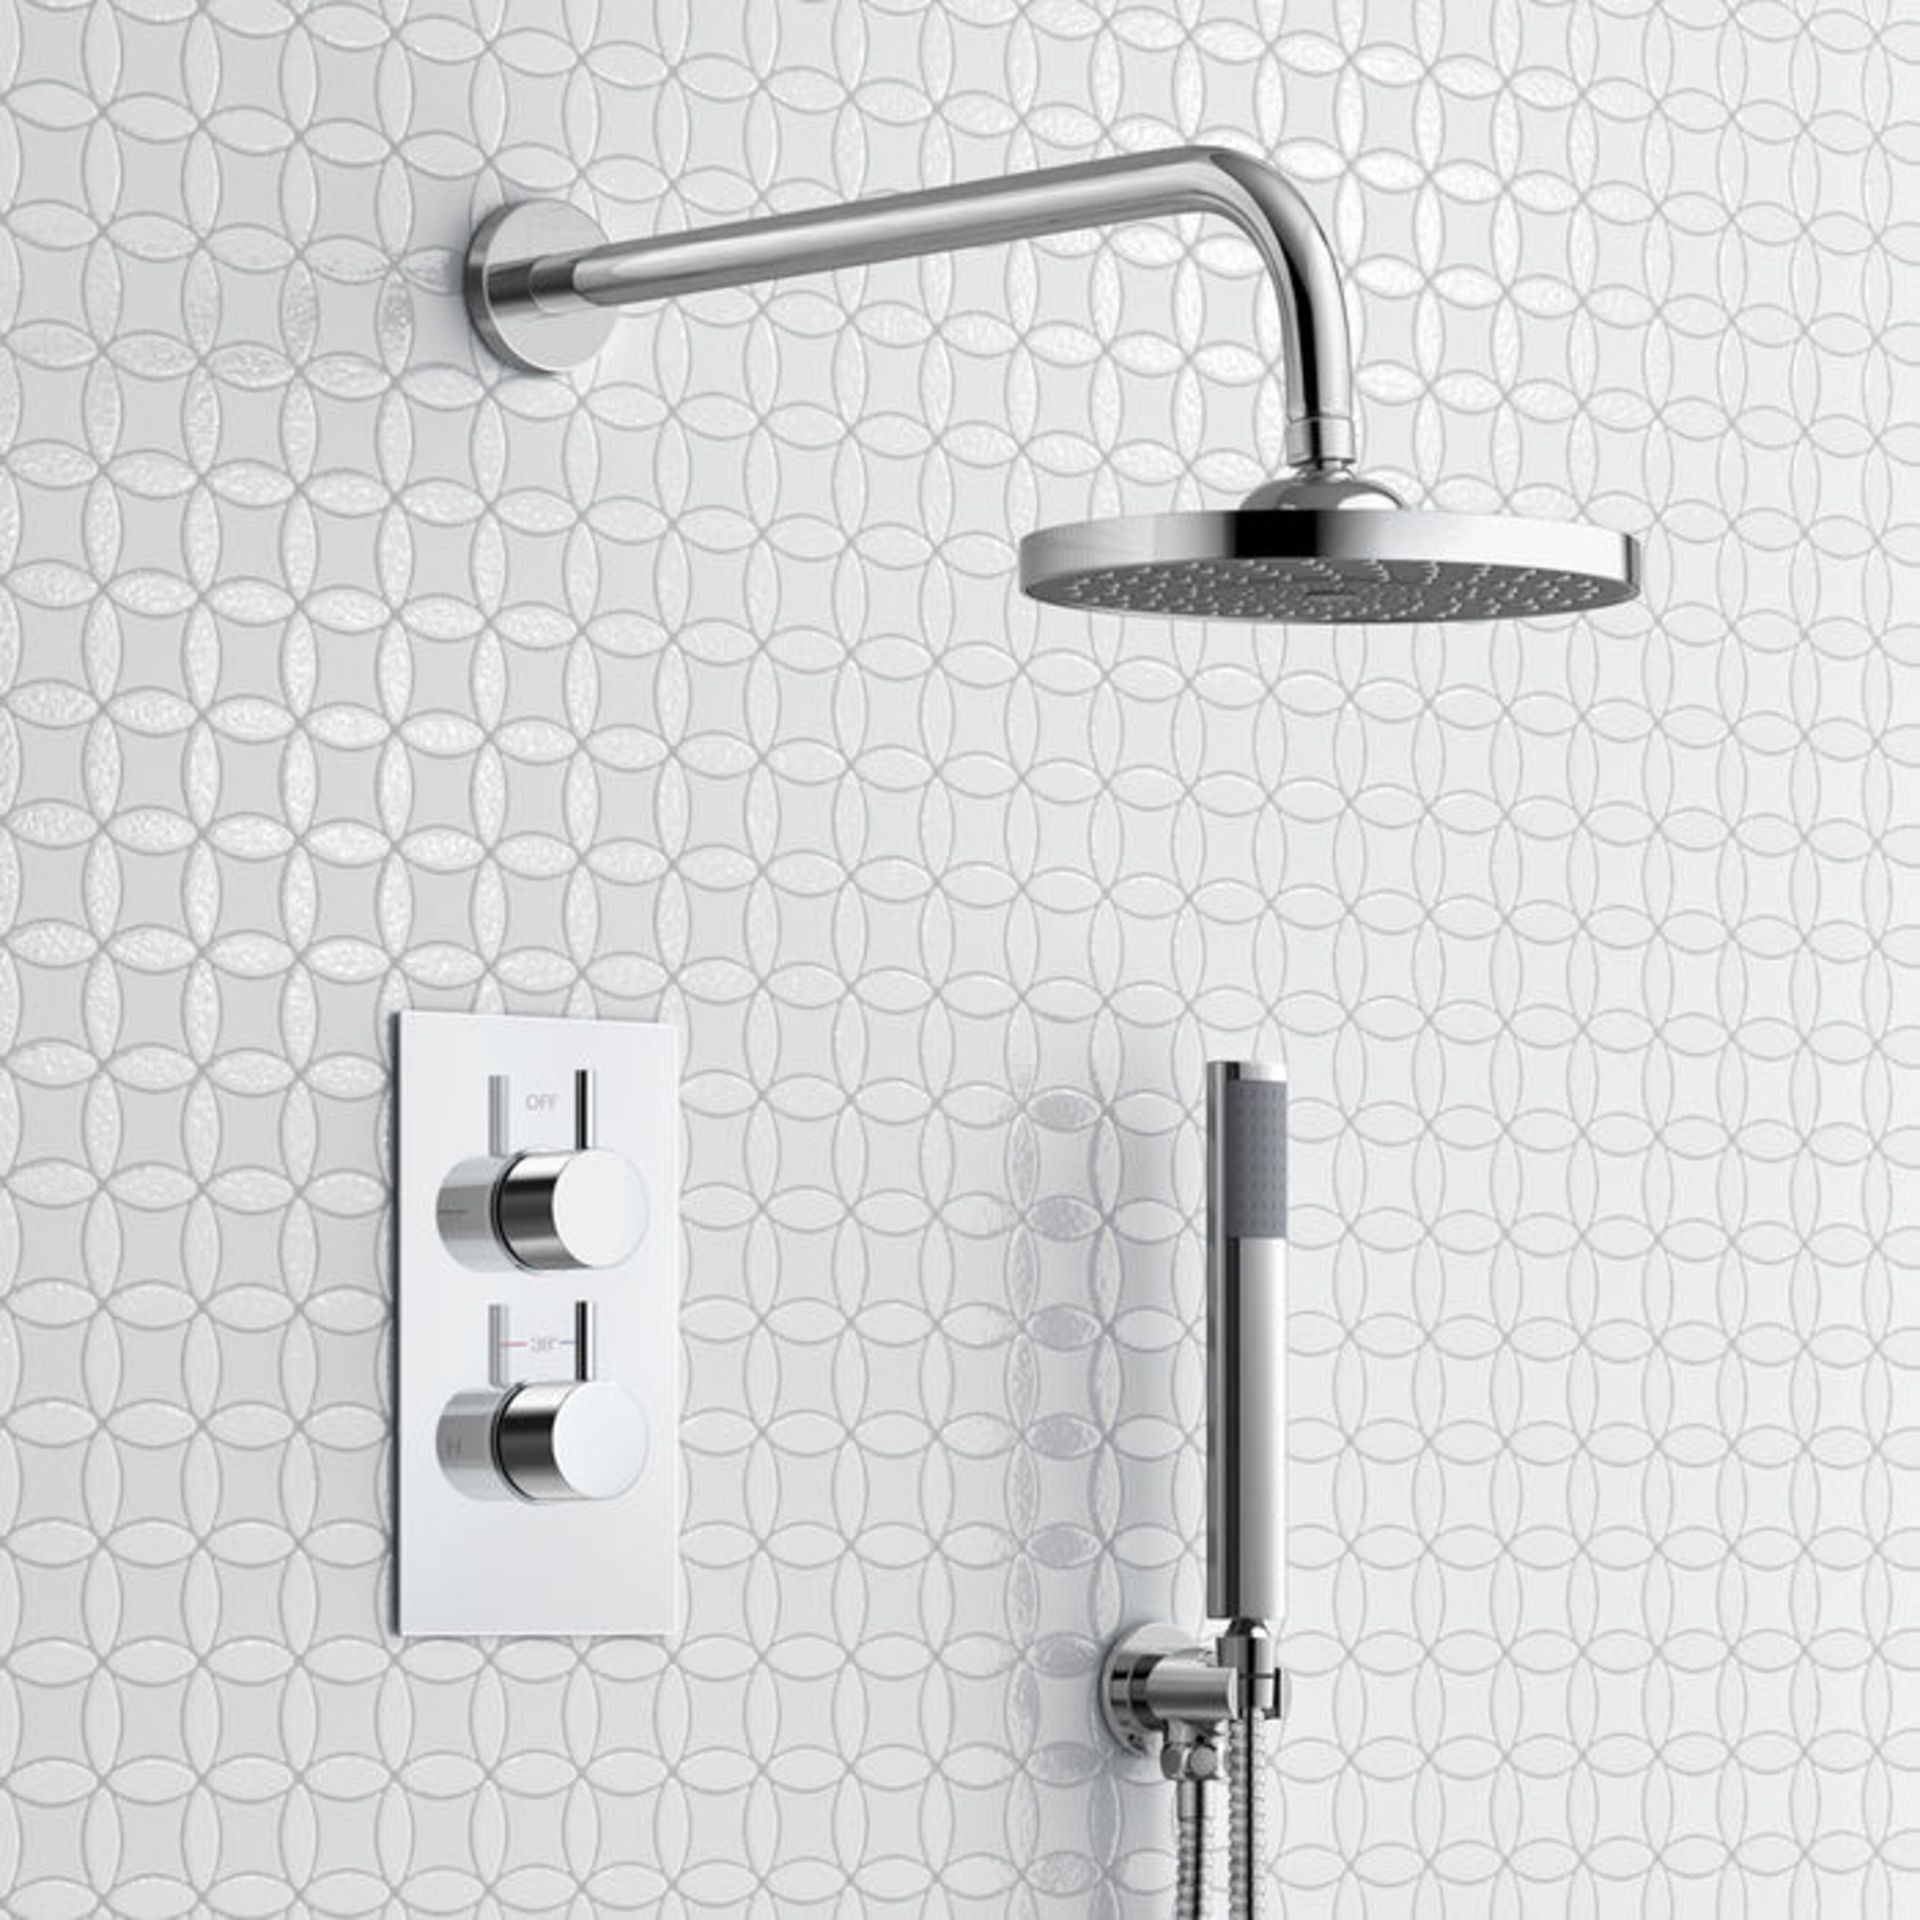 (MW46) Round Concealed Thermostatic Mixer Shower Kit & Medium Head. Family friendly detachable - Image 2 of 5